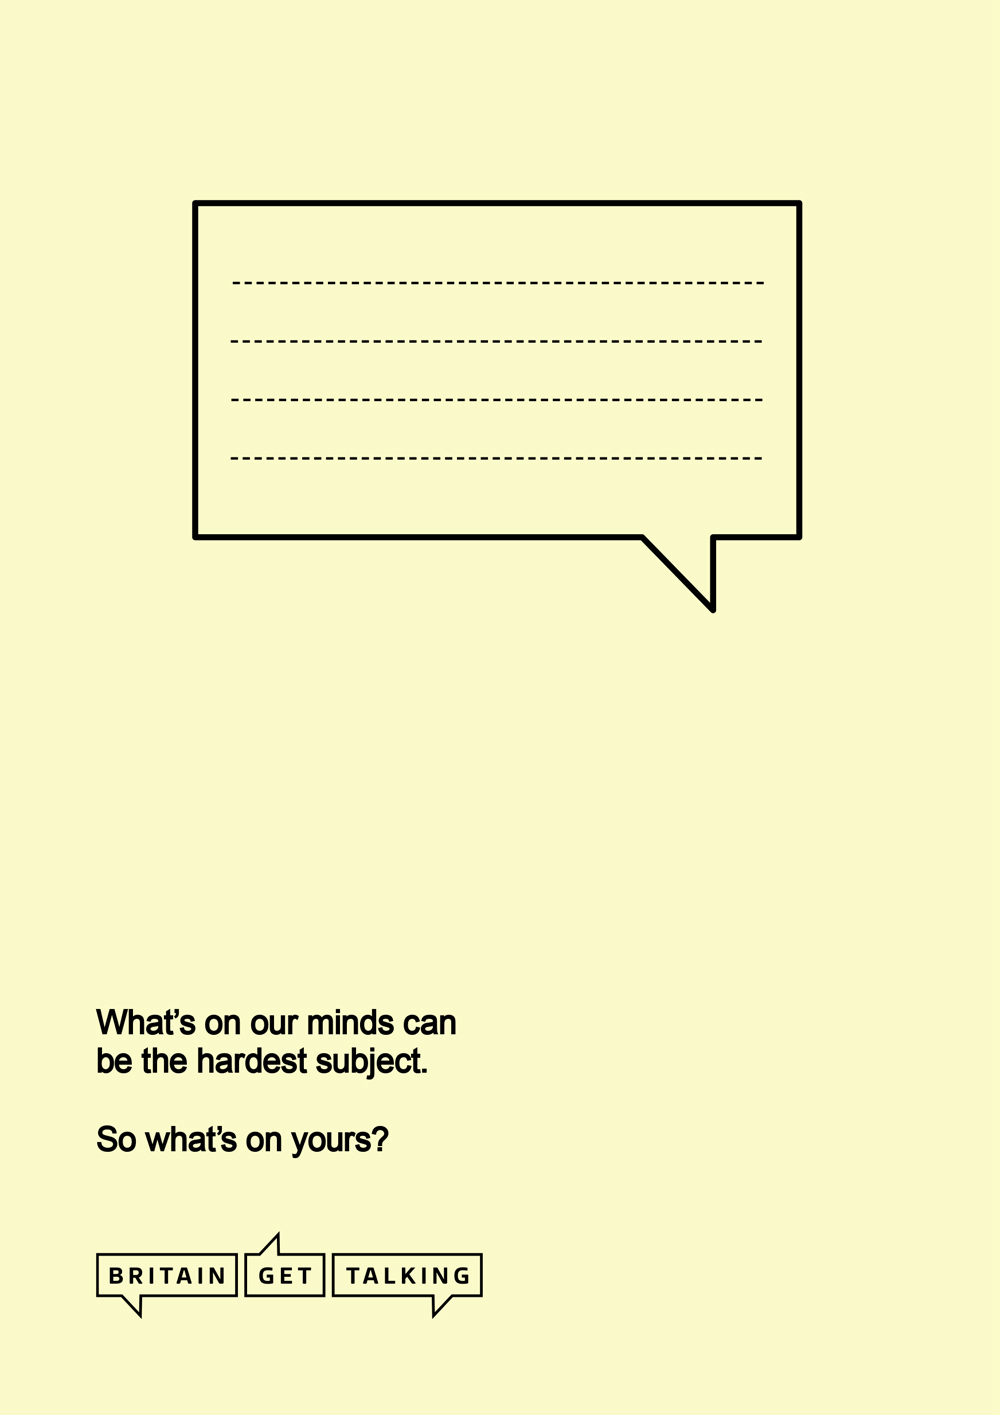 A small image showing the Homework task, an exercise book with an empty speech bubble at the top of the page. It contains lines to write on.